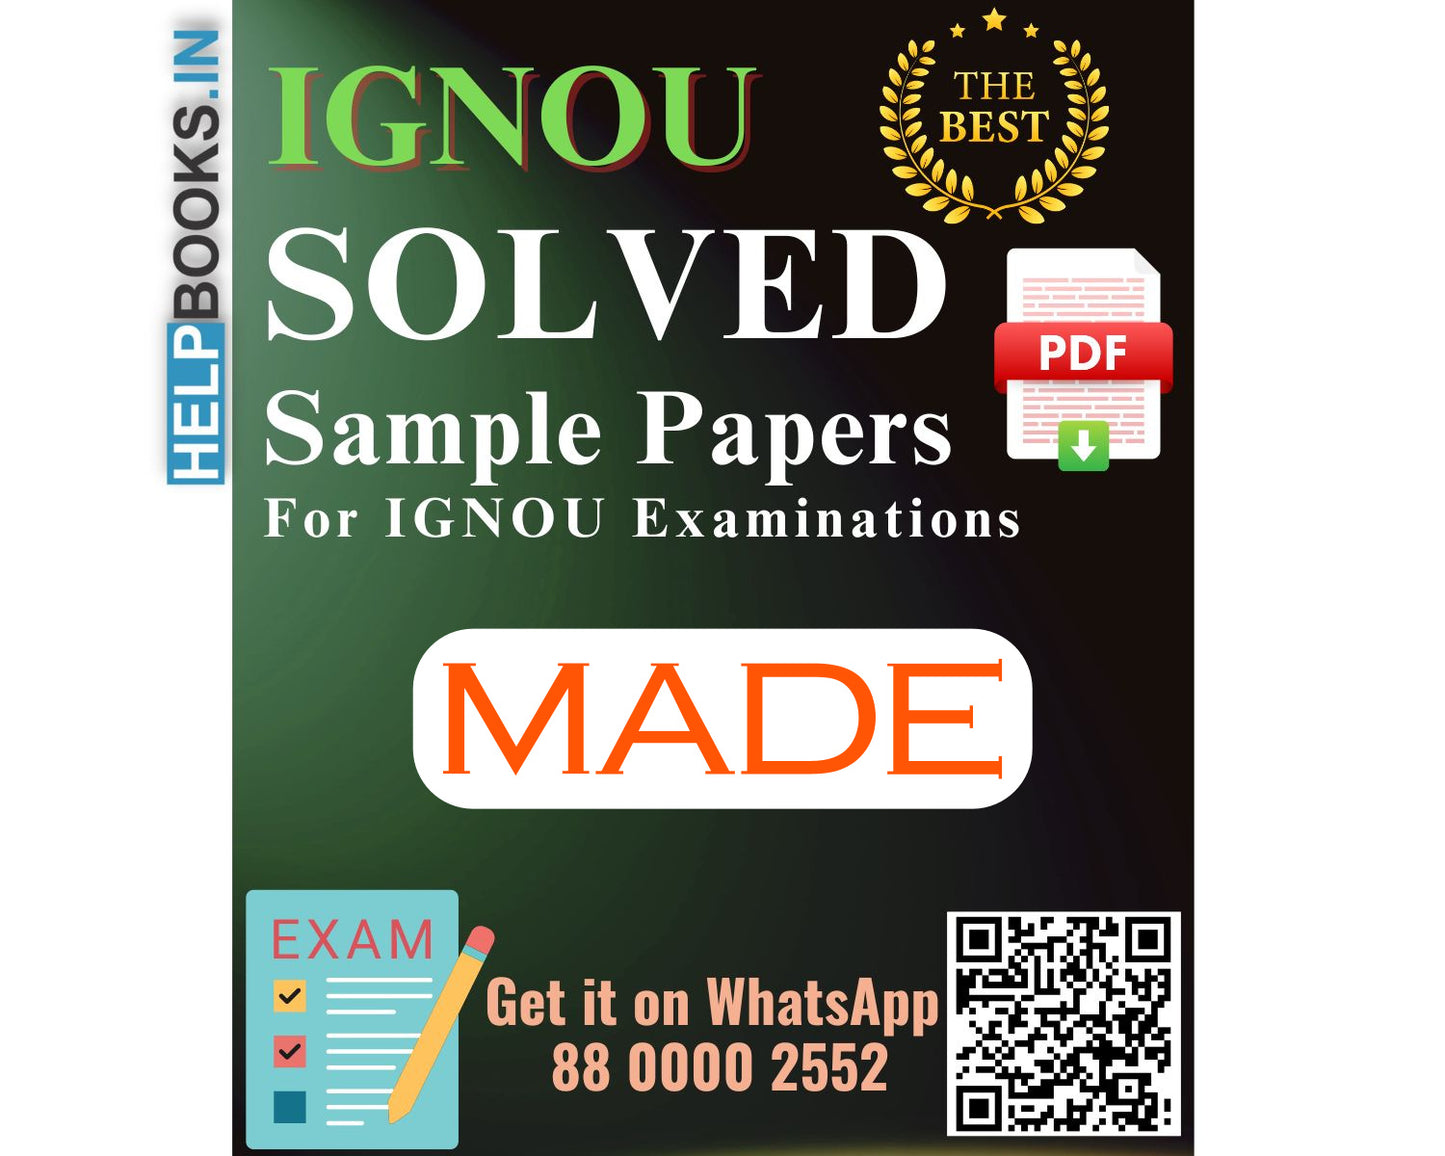 IGNOU Master of Arts (Distance Education) (MADE) | Solved Sample Papers for Exams